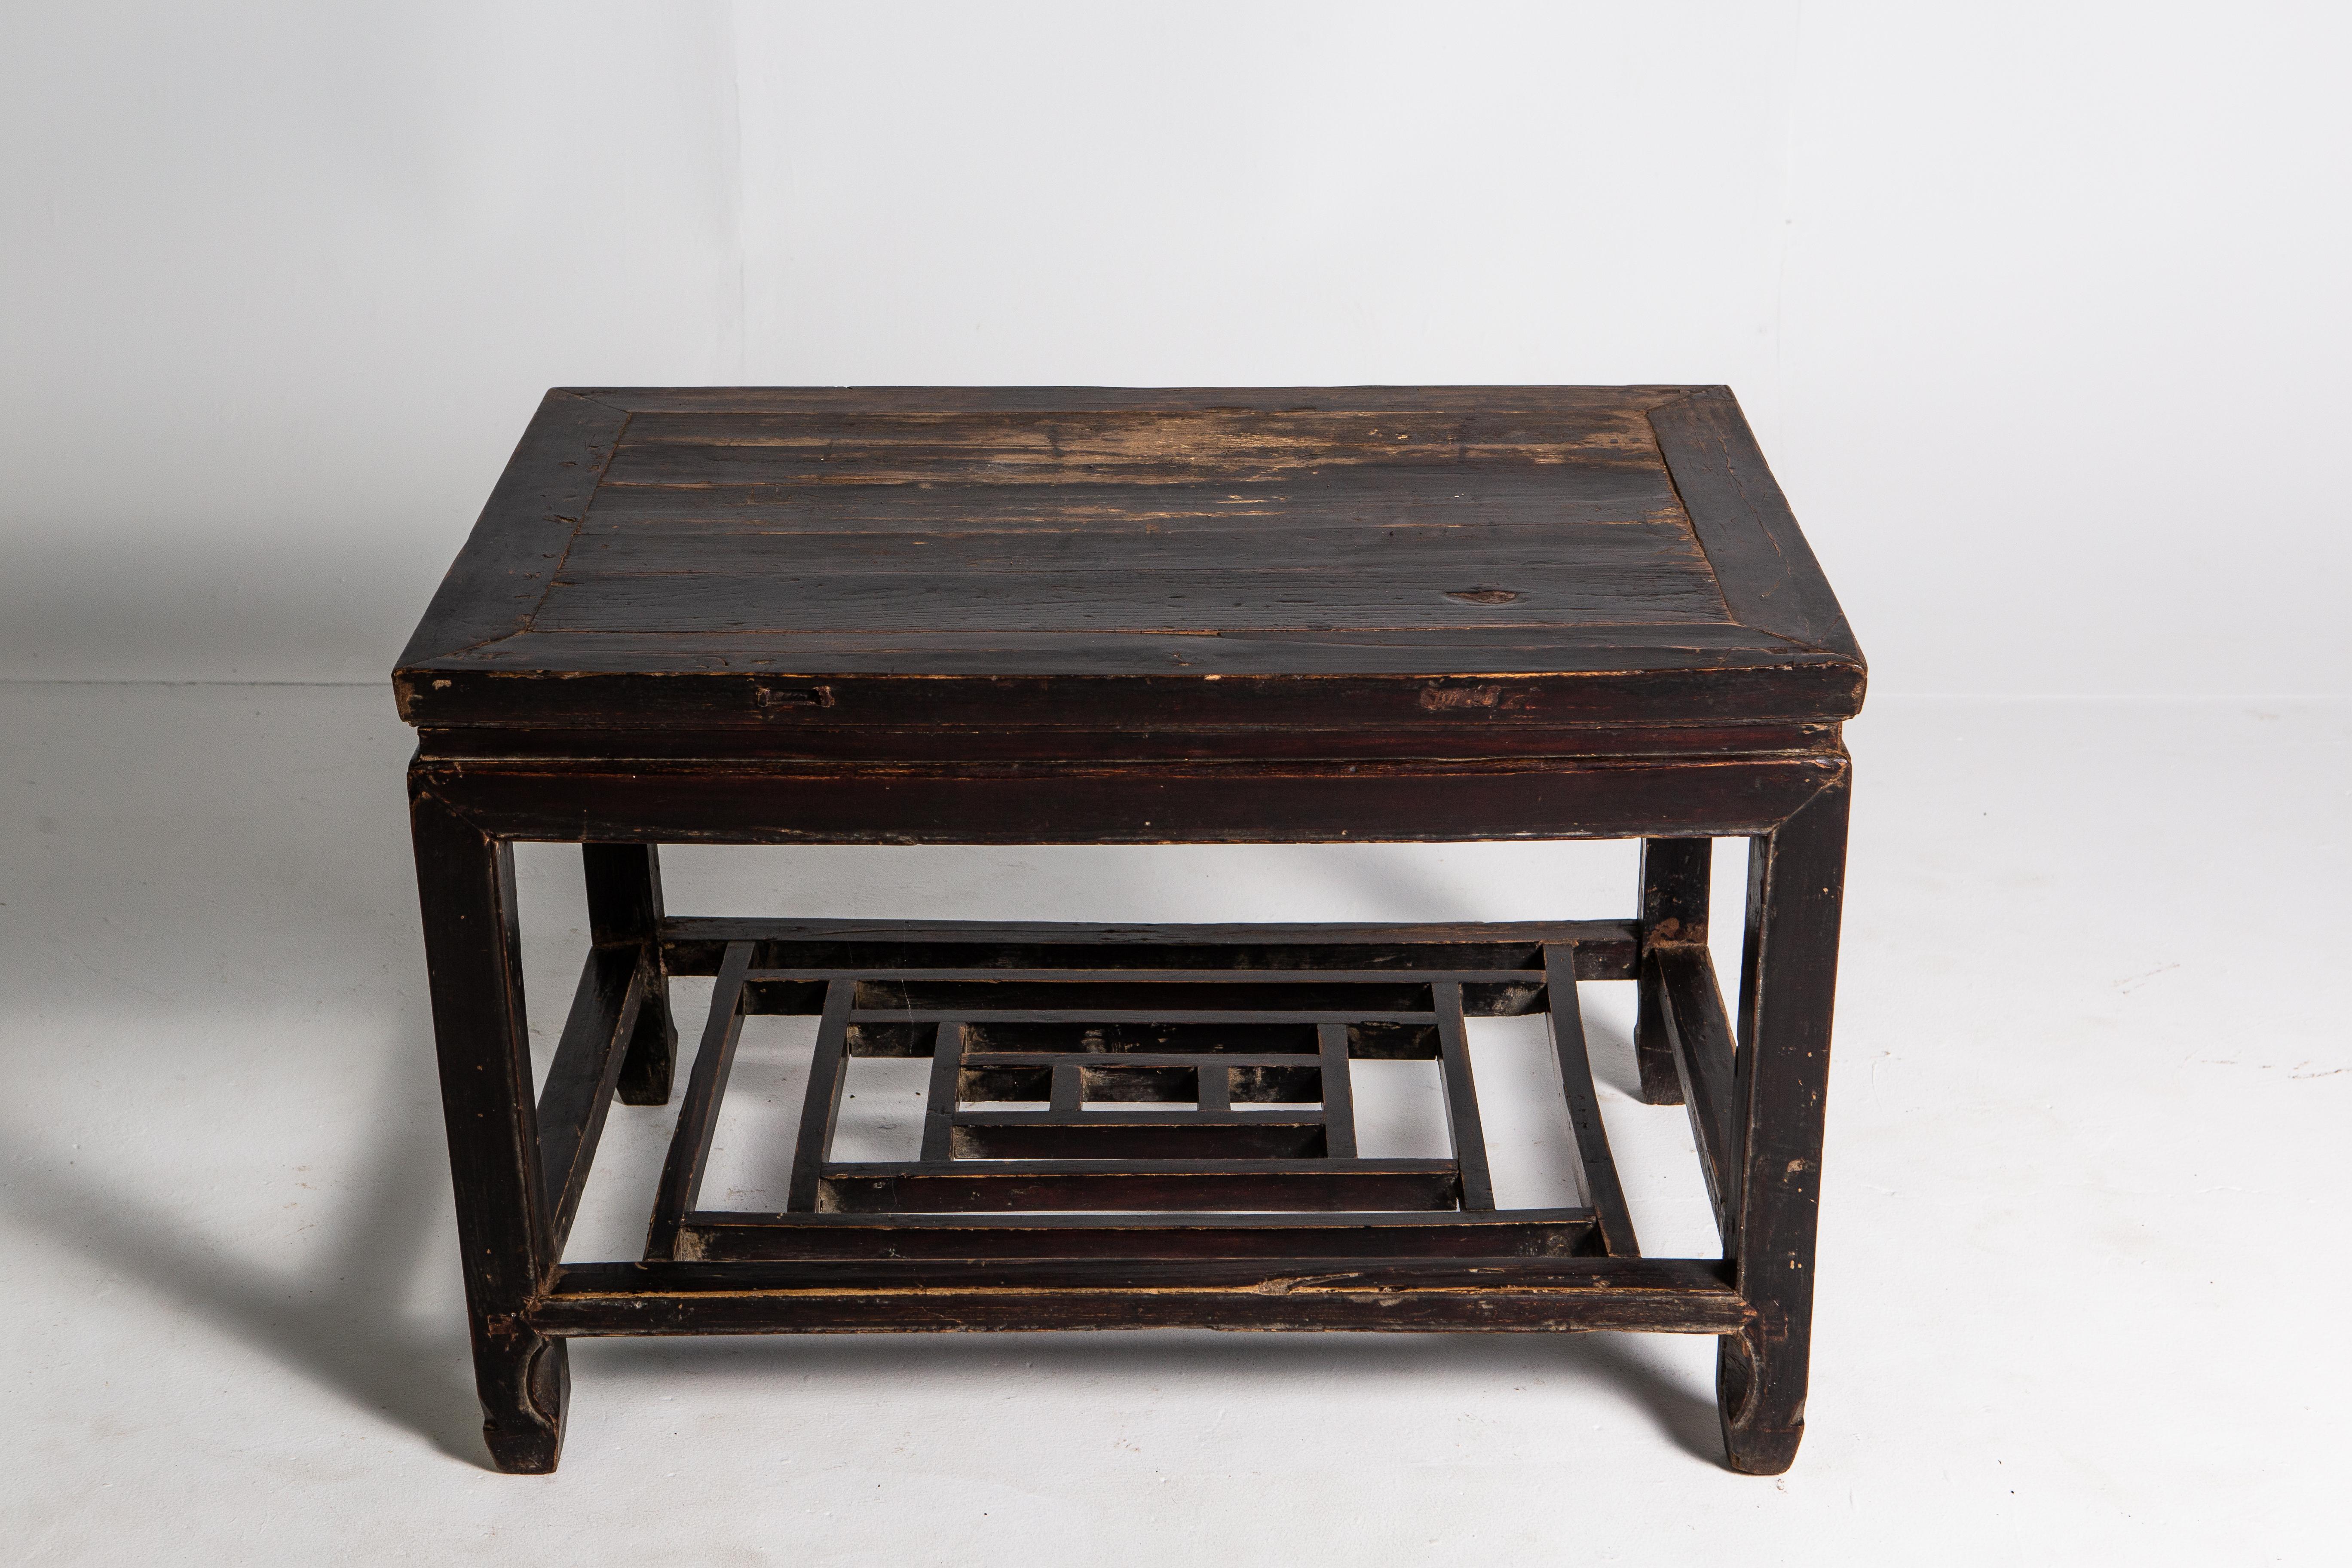 This elm side table dates to the middle-Qing dynasty and features a traditional latticework shelf. The piece retains its original patina and shows wear consistent with age and use.